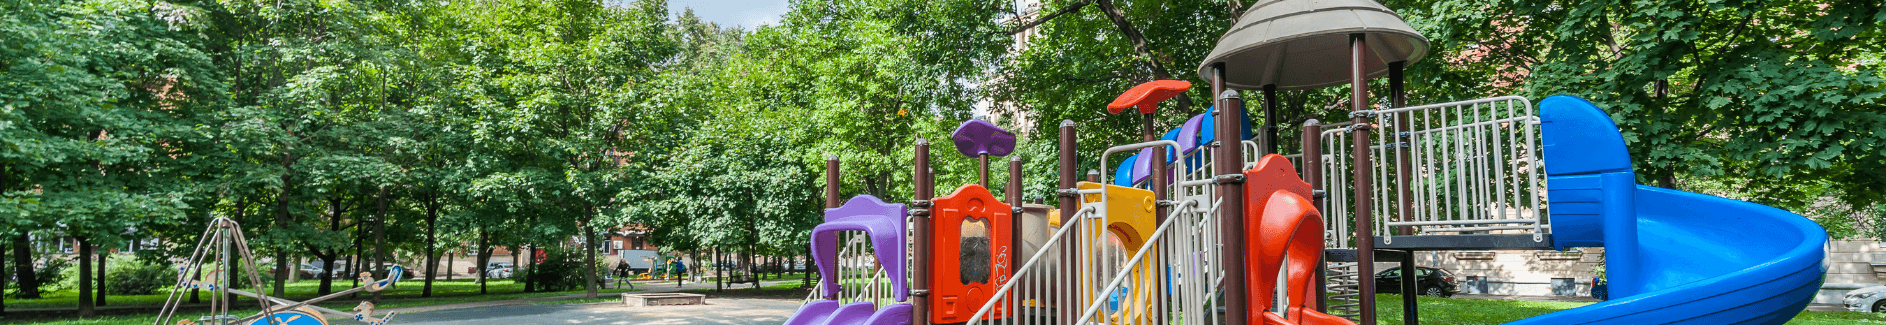 colorful childrens outdoor plastic playground in a park